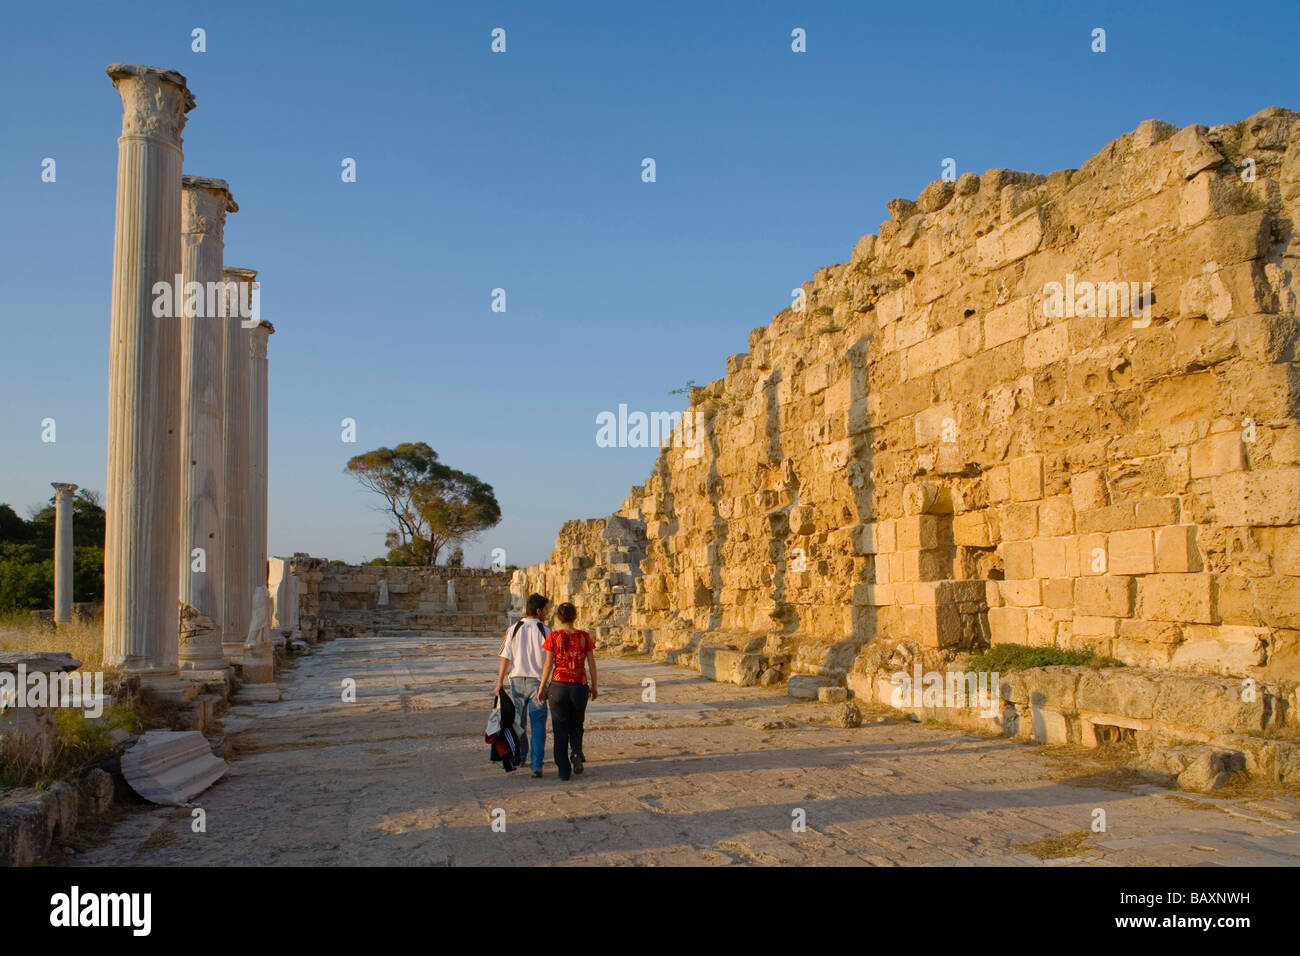 Tourists visiting the Antique Gymnasium, Palaestra, with columned courtyard, Archaeology, Salamis ruins, Salamis, North Cyprus, Stock Photo